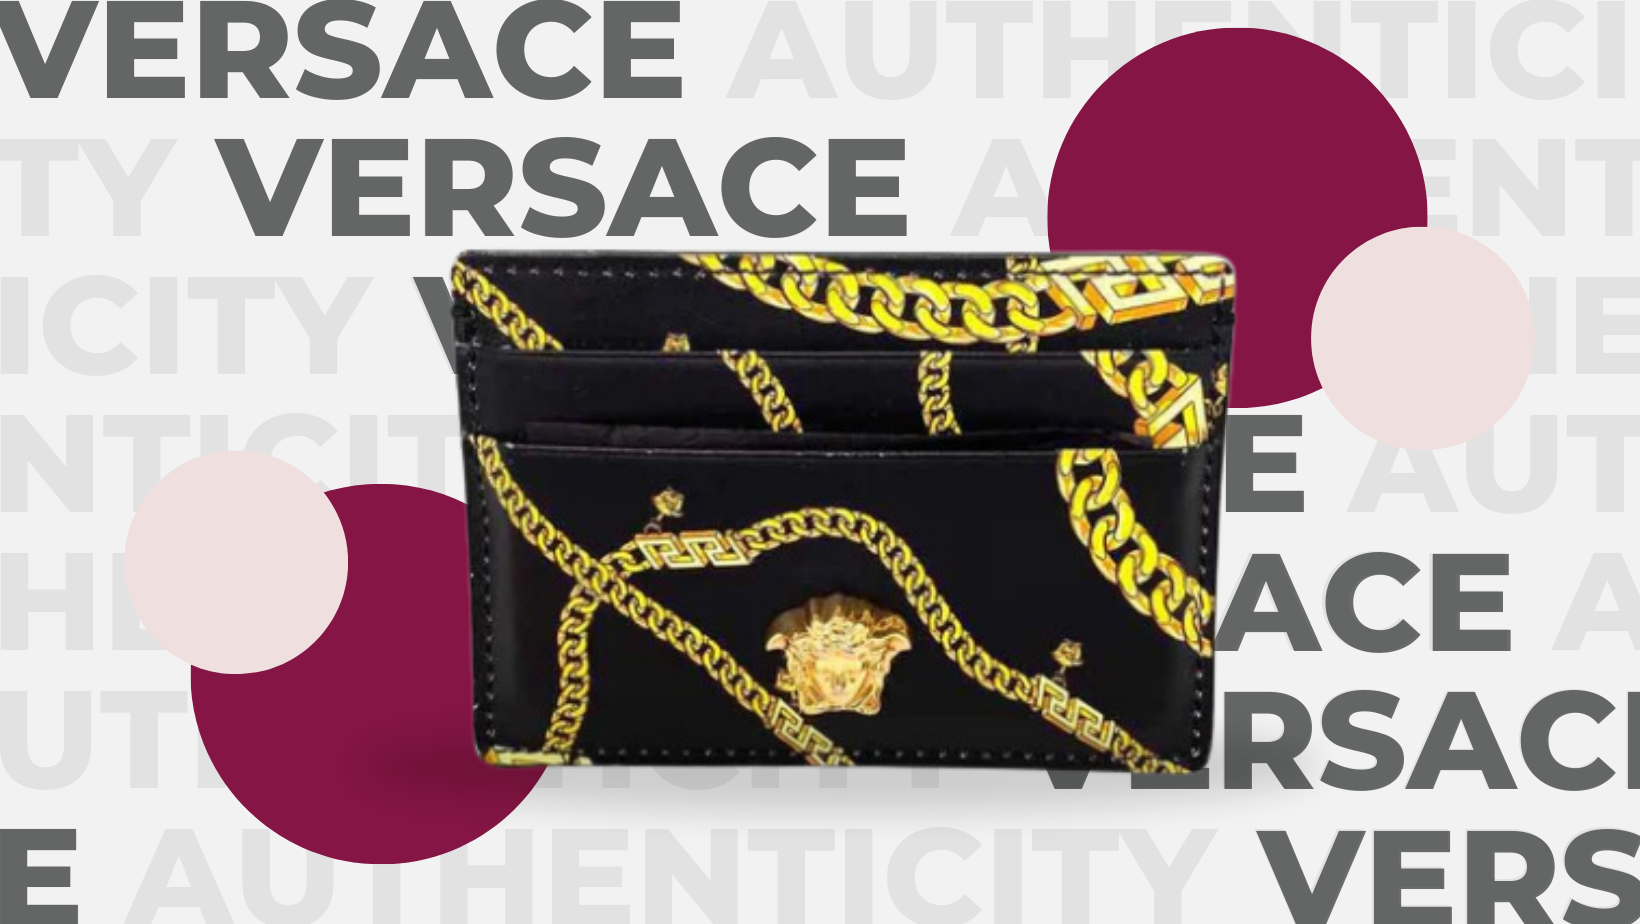 How to Tell if Your Versace is Real